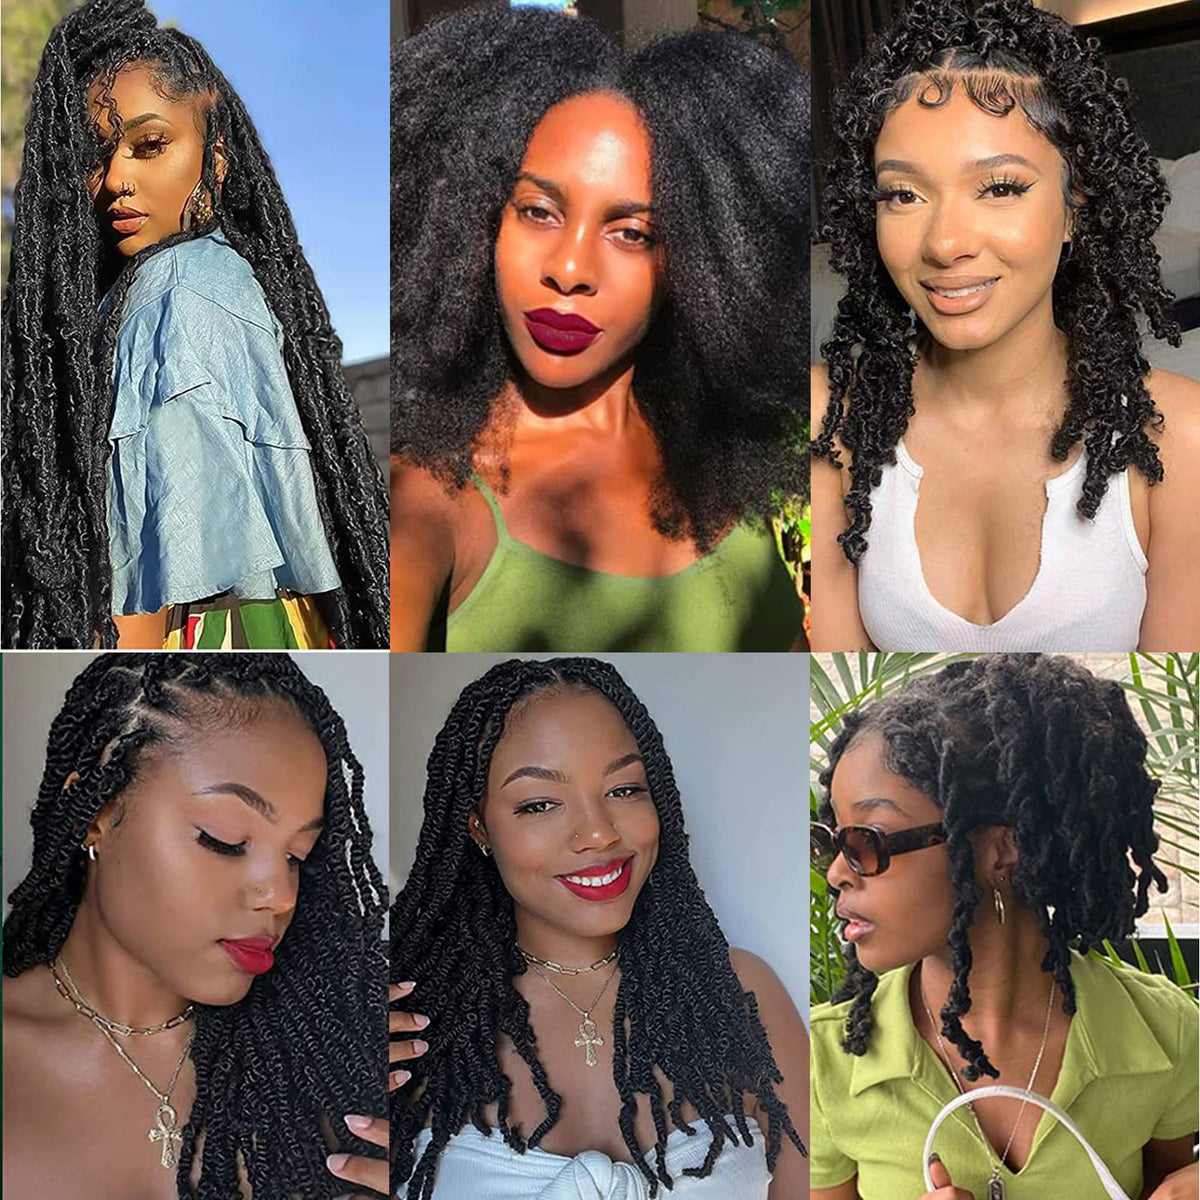 18 Inches Pack of 6 Marley Hair For Faux Locs Soft & Bouncy Cuban Twist Hair Synthetic Kanekalon Kinky Twist Hair For Braiding Crochet Marley Twist Braiding Hair For Black Woman 1B / Natural Black